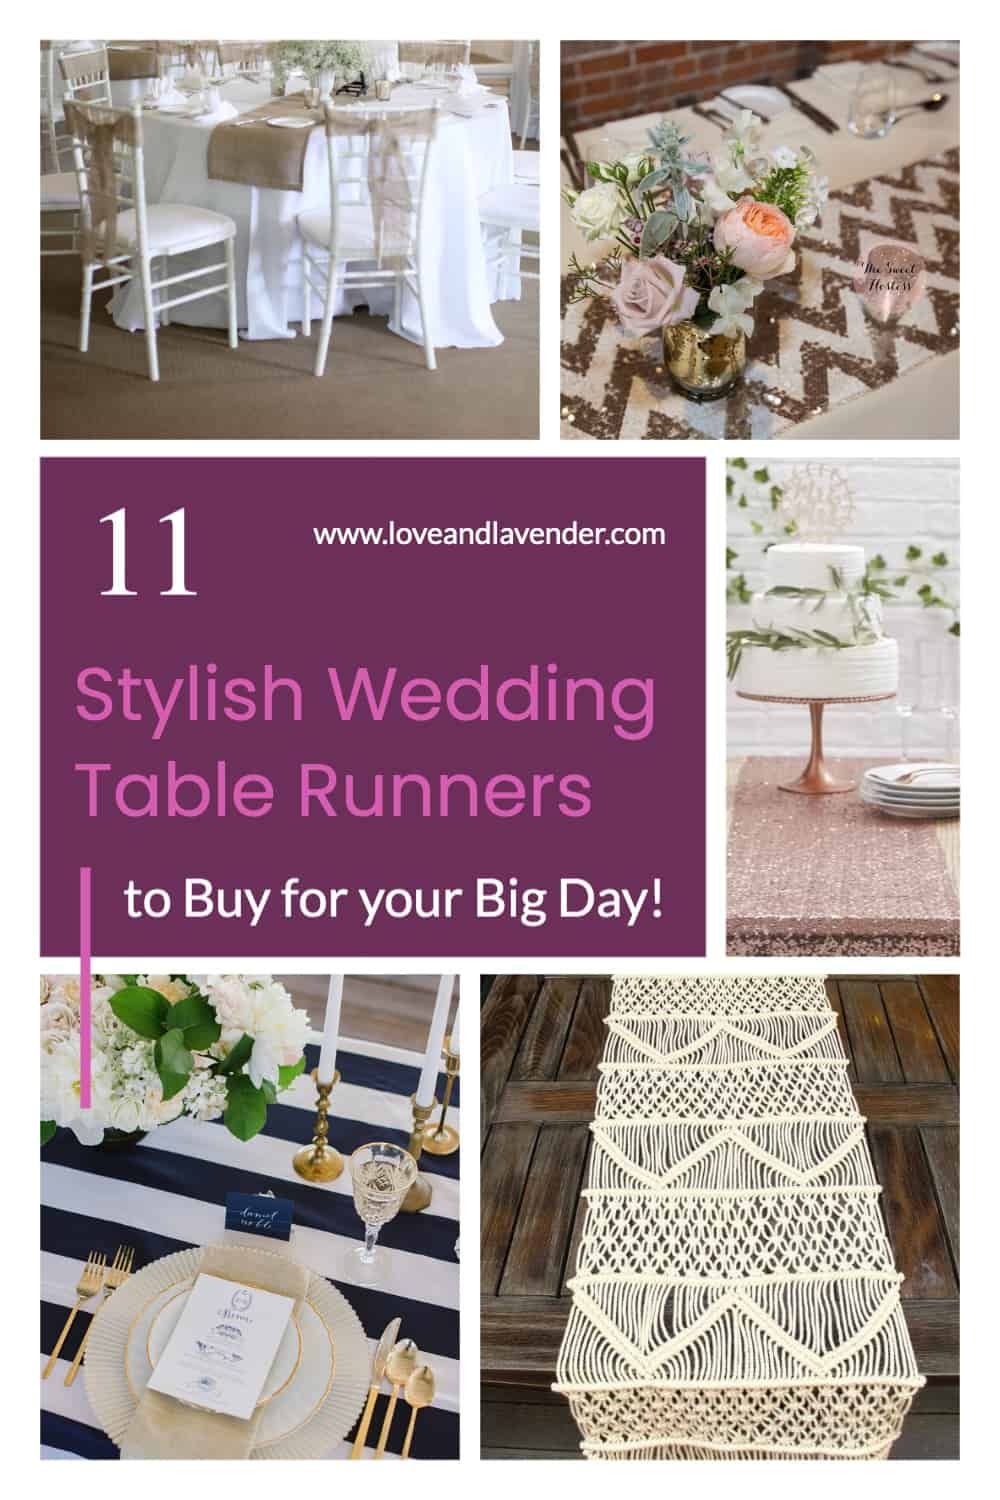 11 Stylish Wedding Table Runners to Buy for your Big Day!